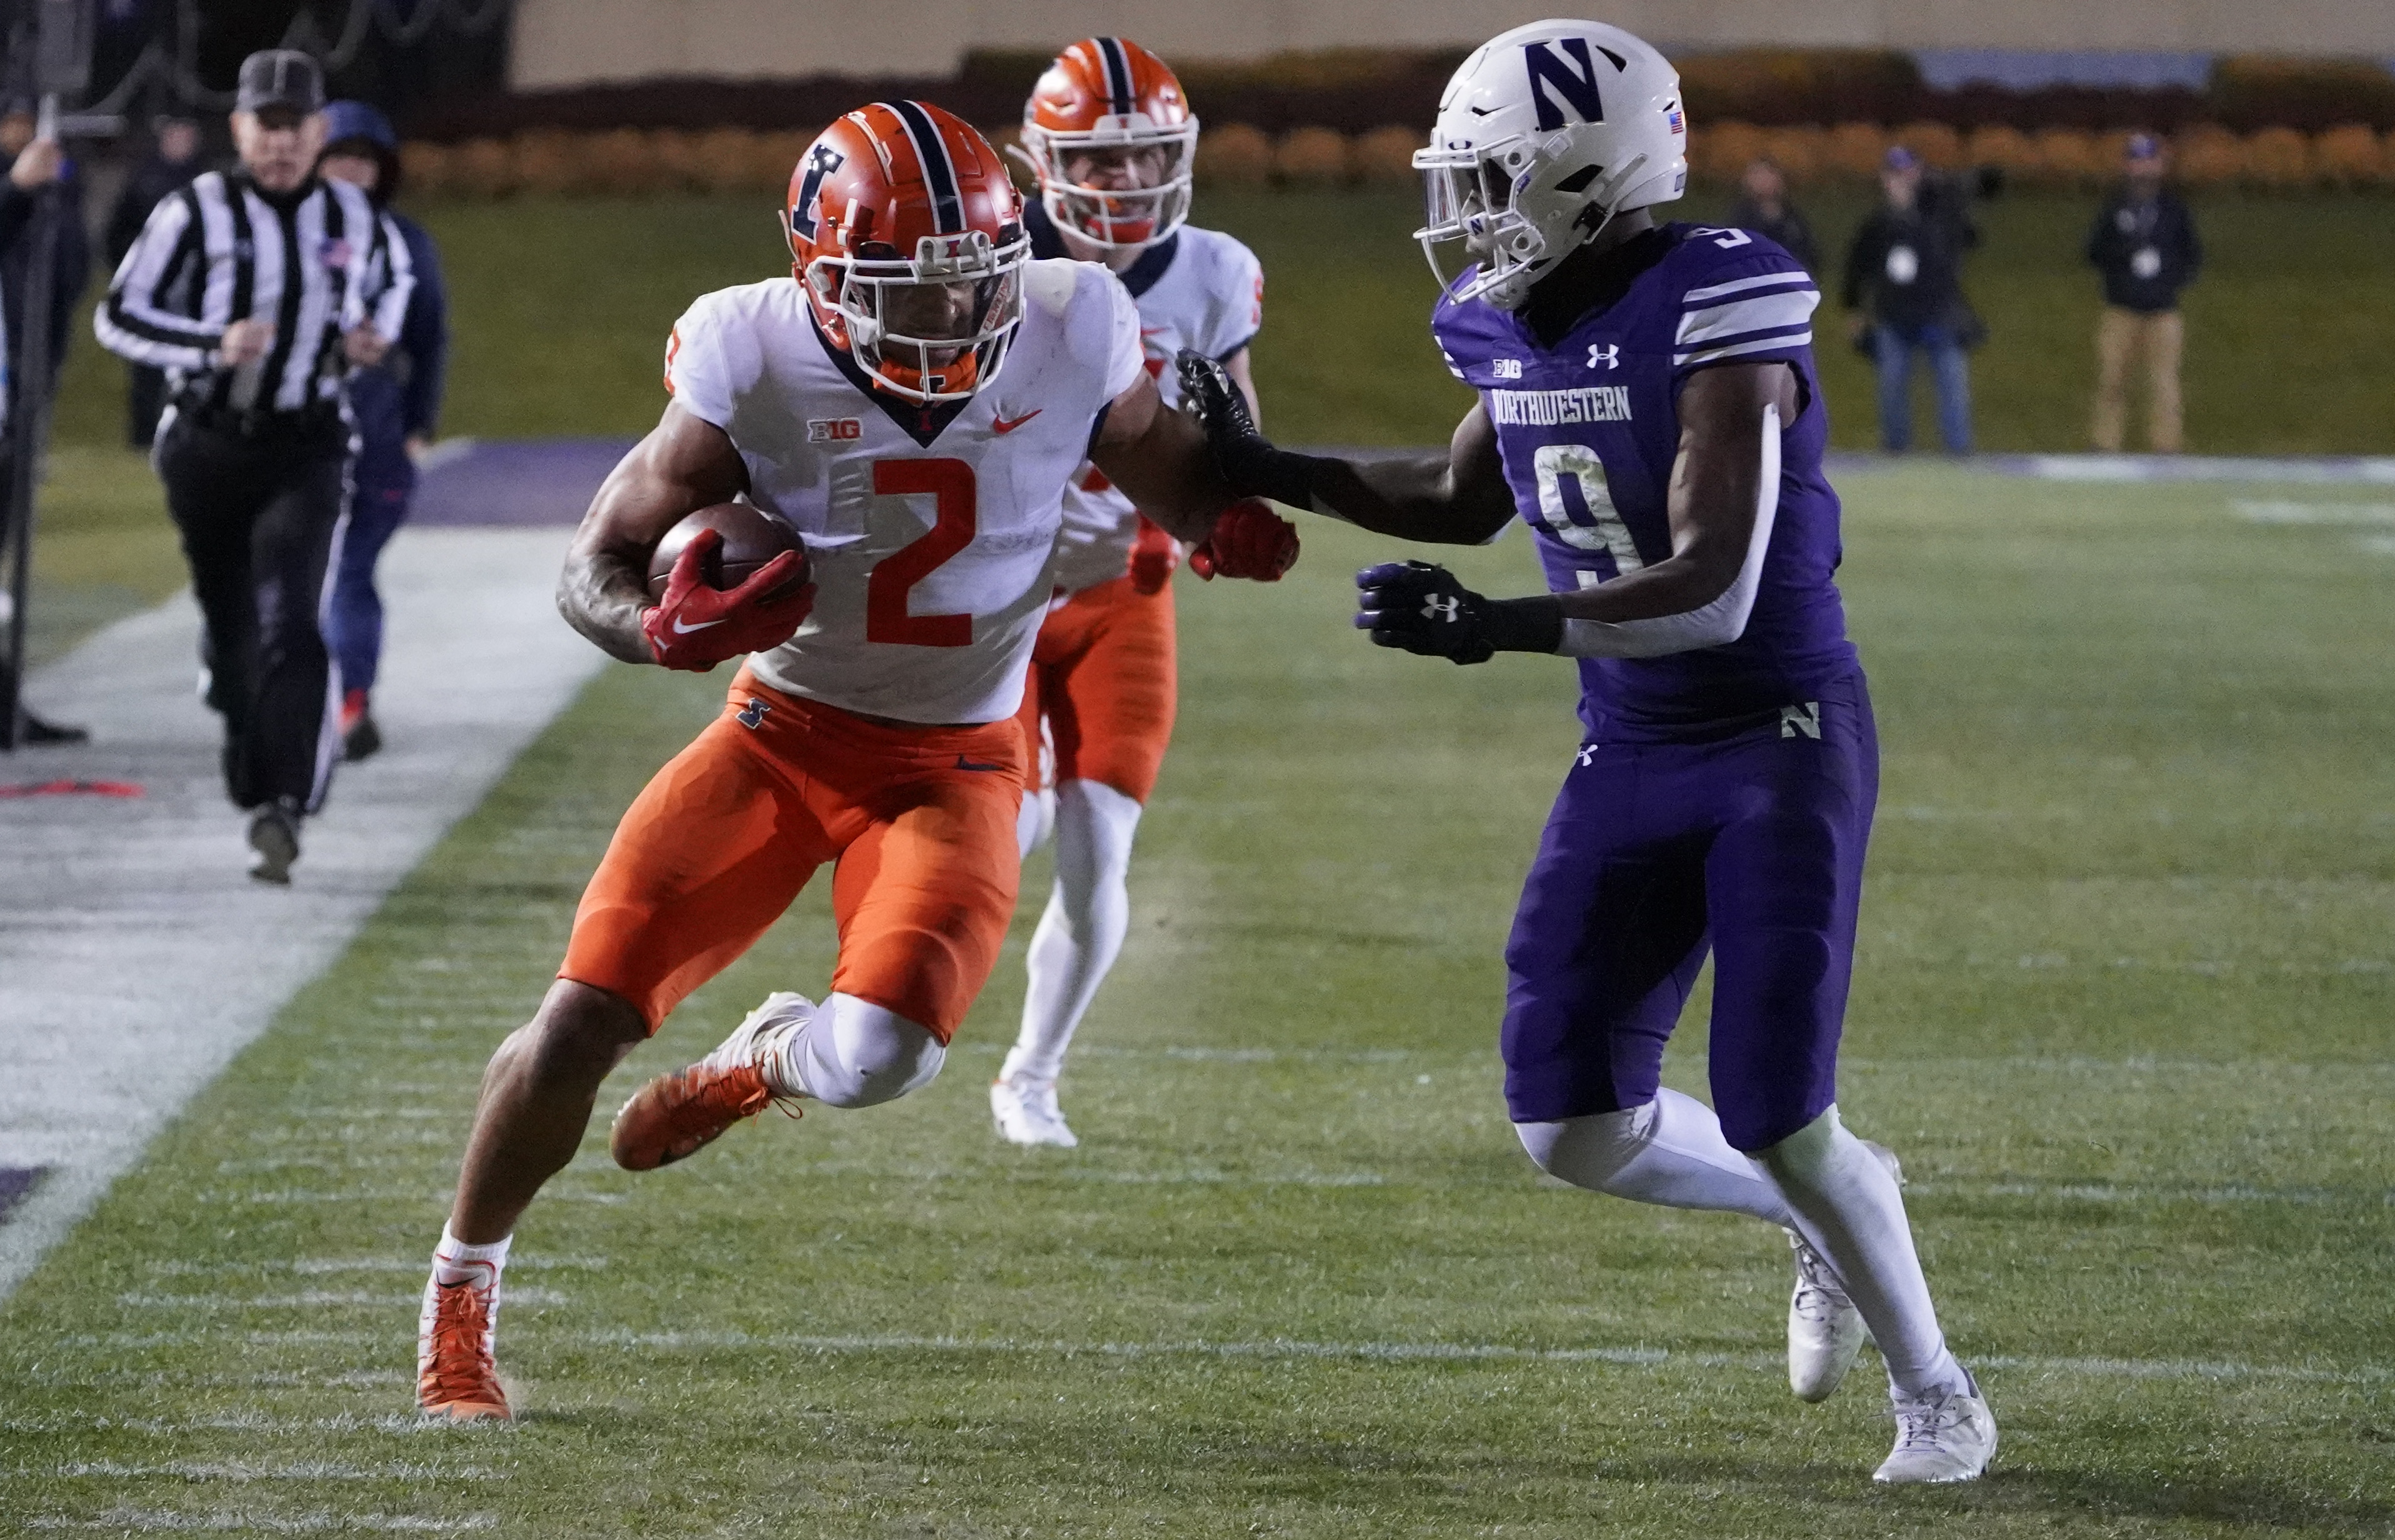 Illinois RB Opts Out Ahead of ReliaQuest Bowl Matchup Against Mississippi State